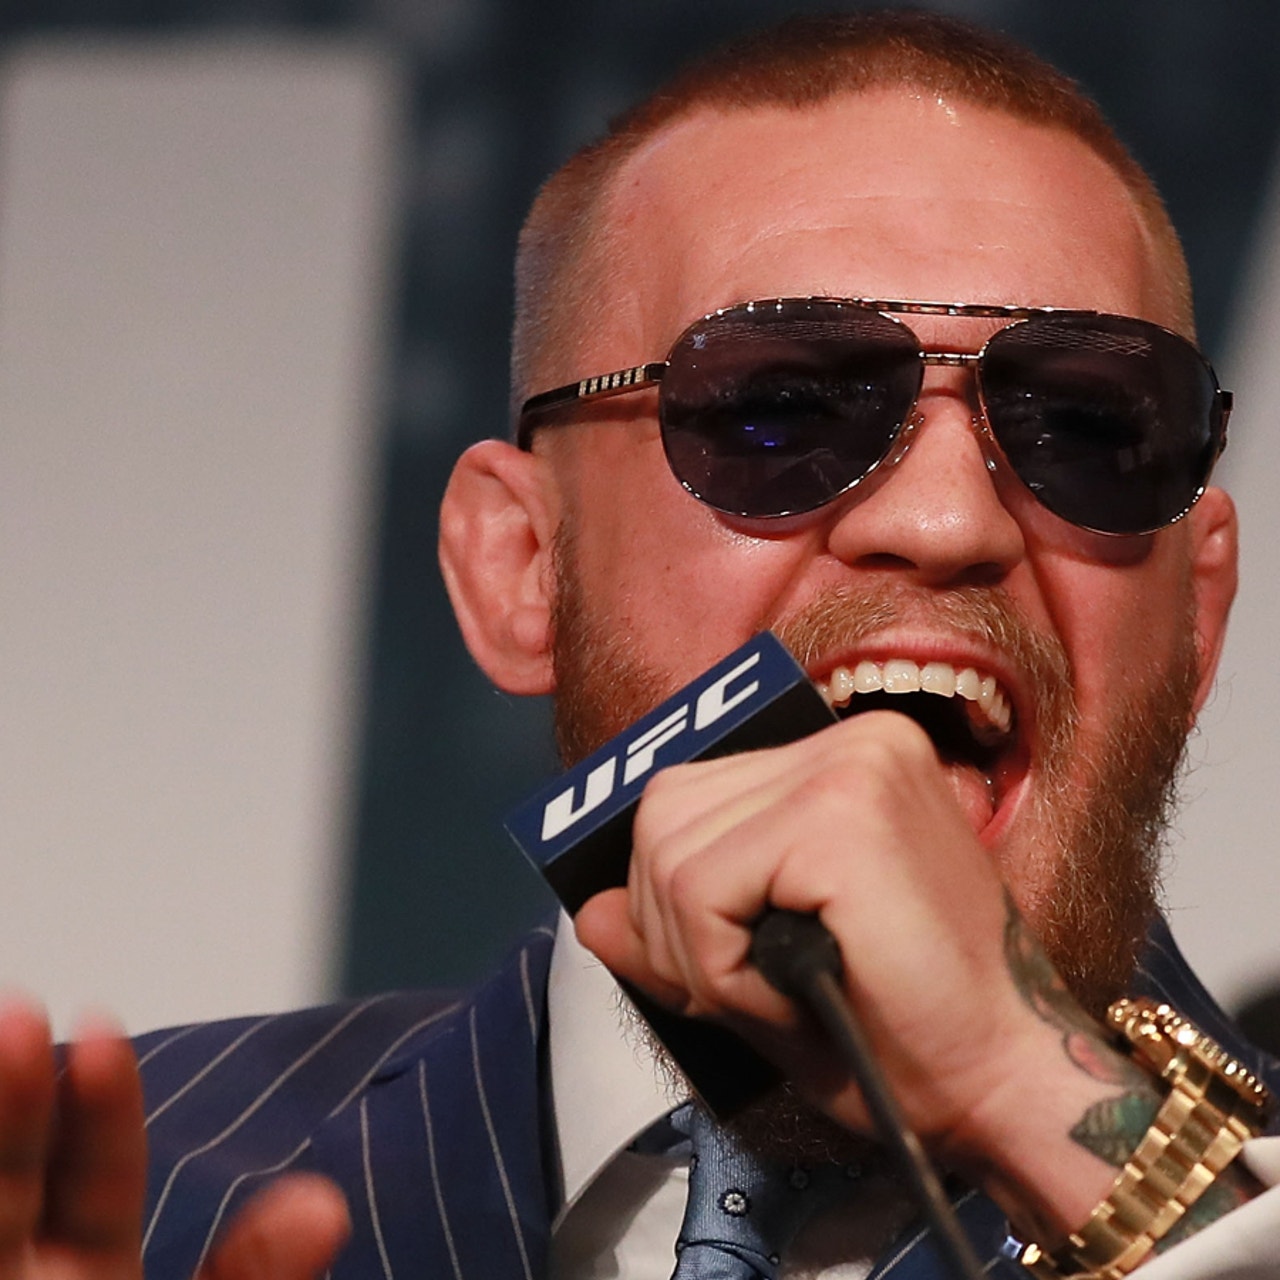 Conor McGregor set to shatter his own record as highest-paid fighter in the  UFC